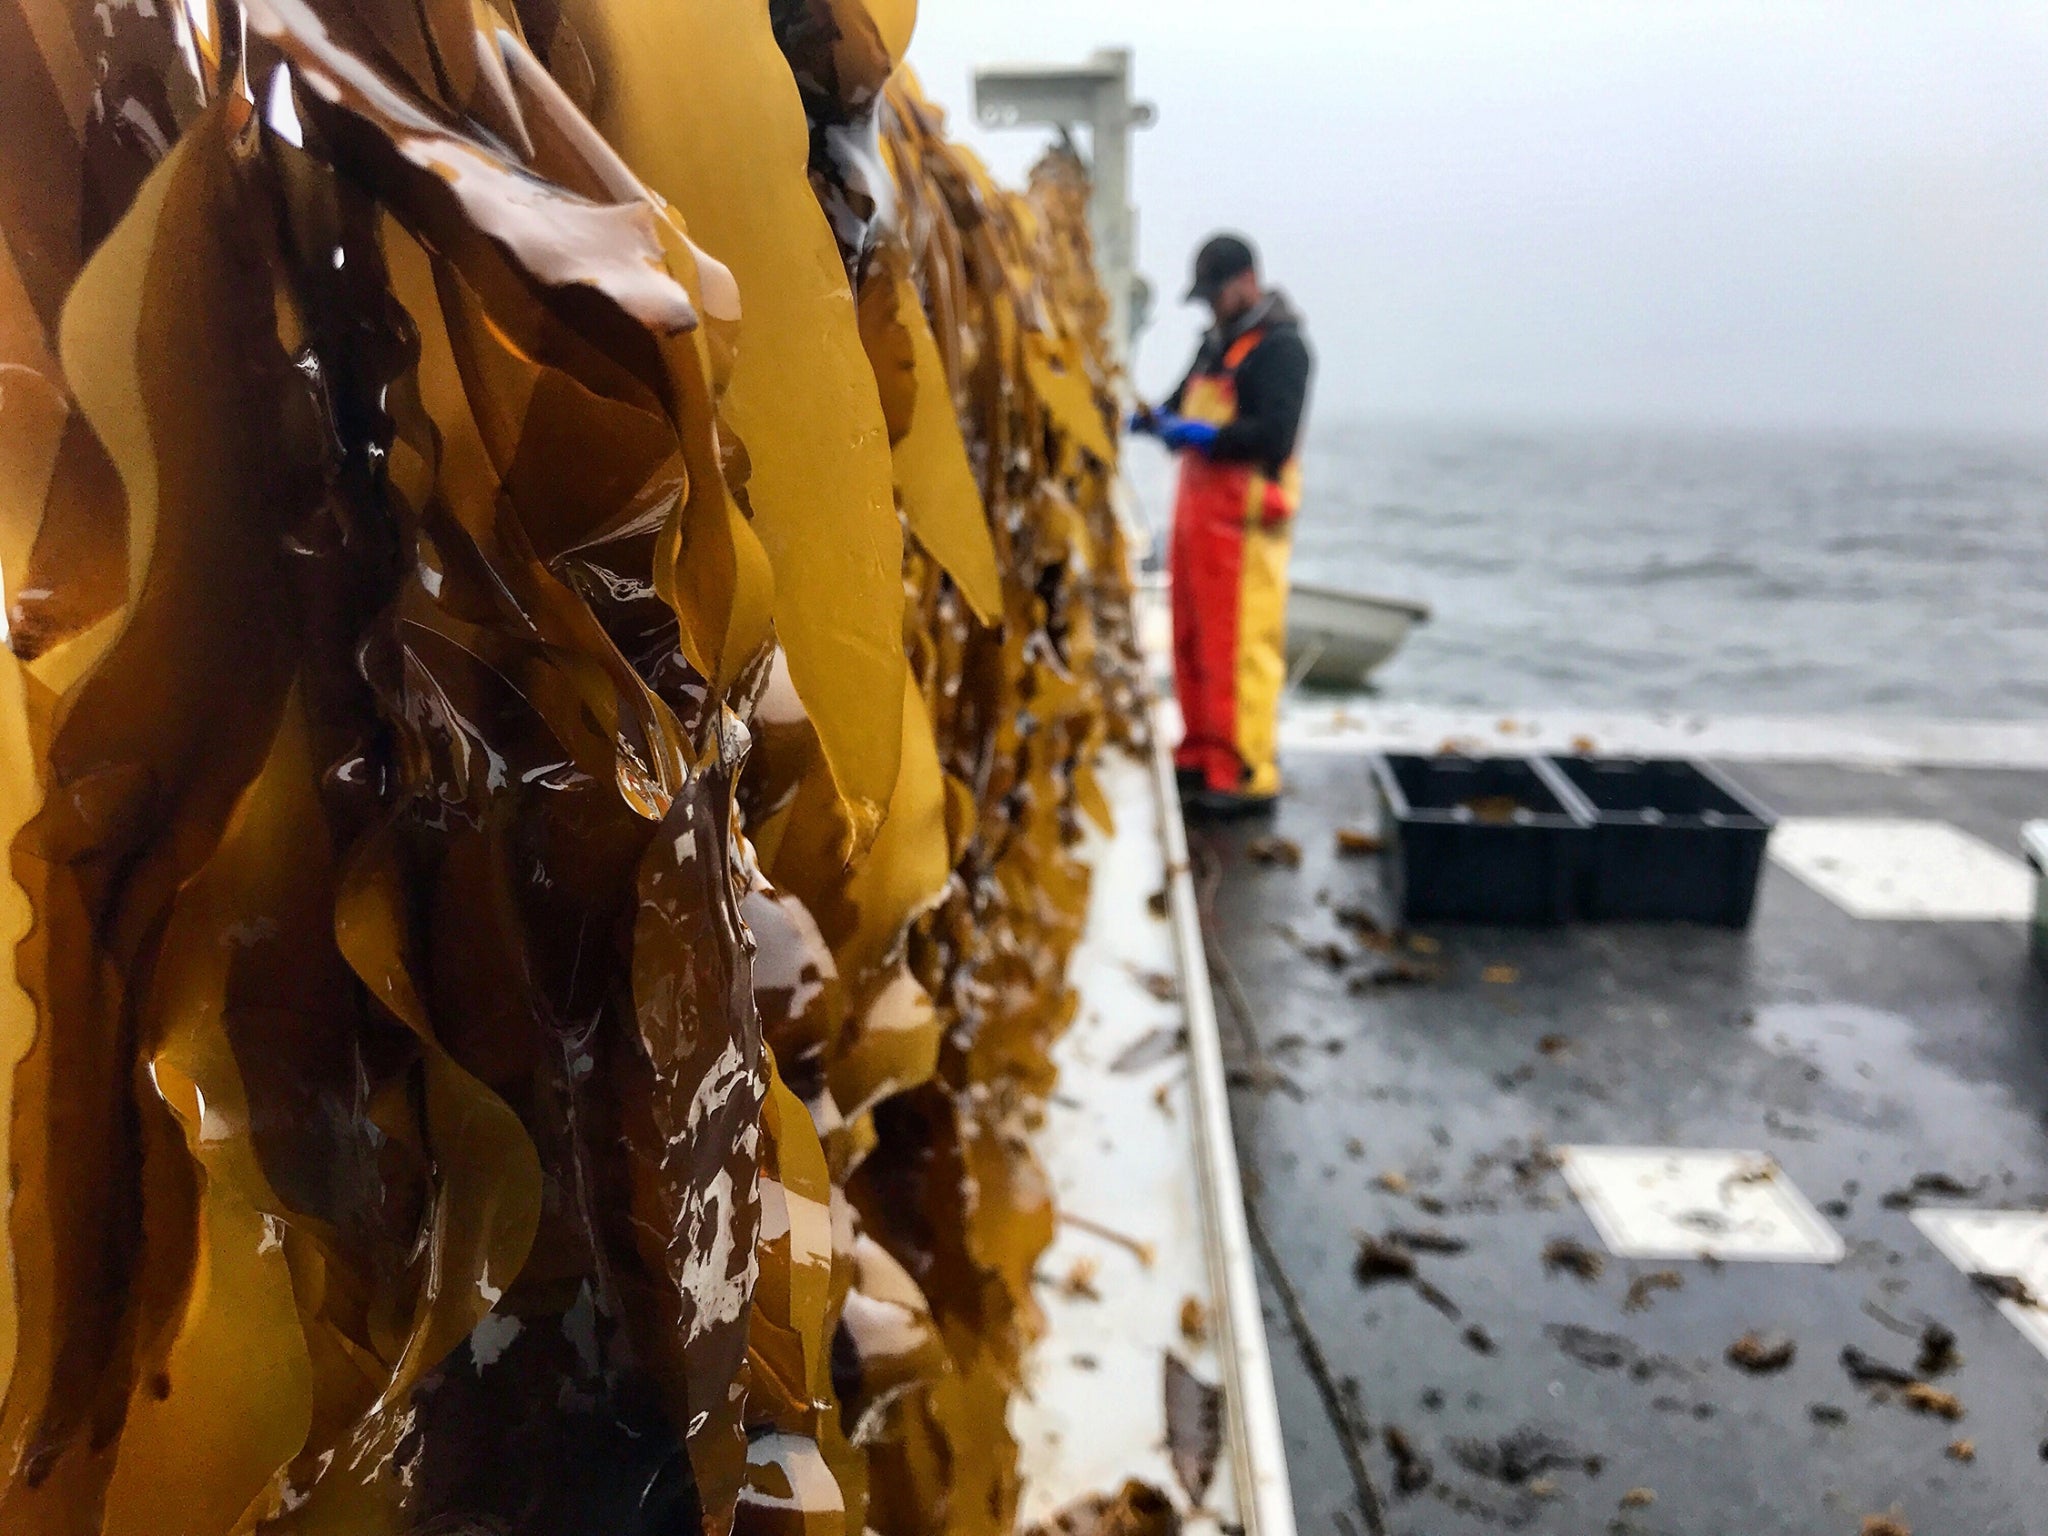 Nautical Farms cofounder Jake Patryn trims and harvests the sugar kelp crop, which will be sent to shore via boat to be sun-dried and made into a variety of nutritious products.